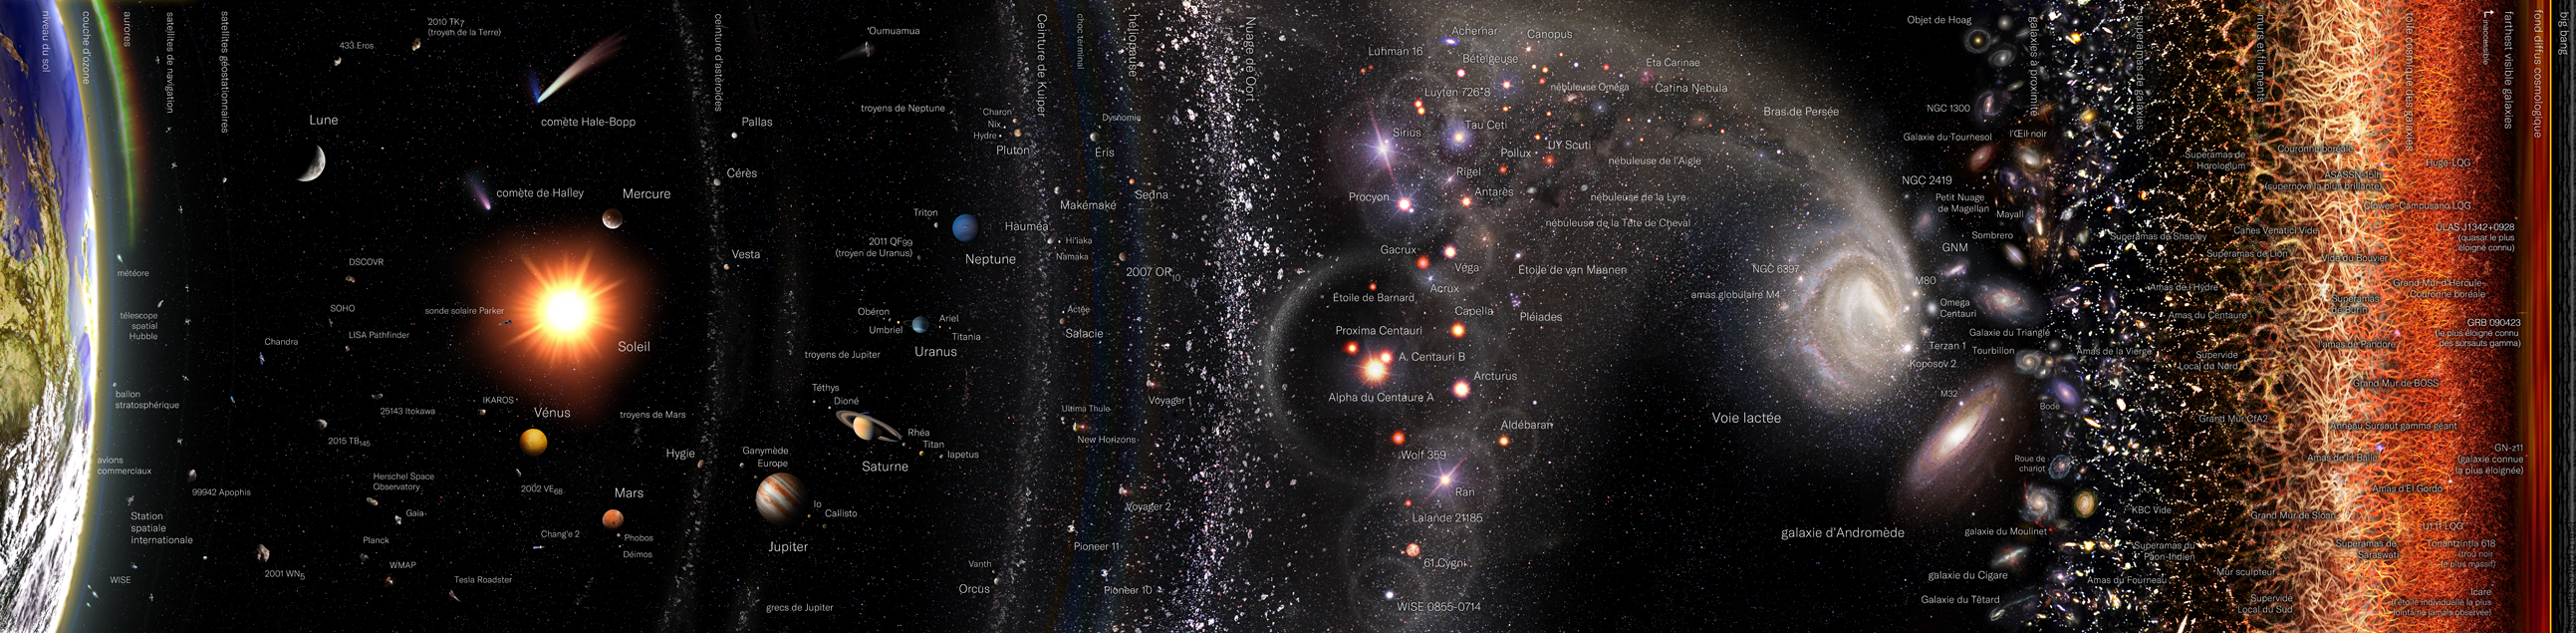 Observable_Universe_Logarithmic_Map_(horizontal_layout_french_annotations)_for_wikipedia.png